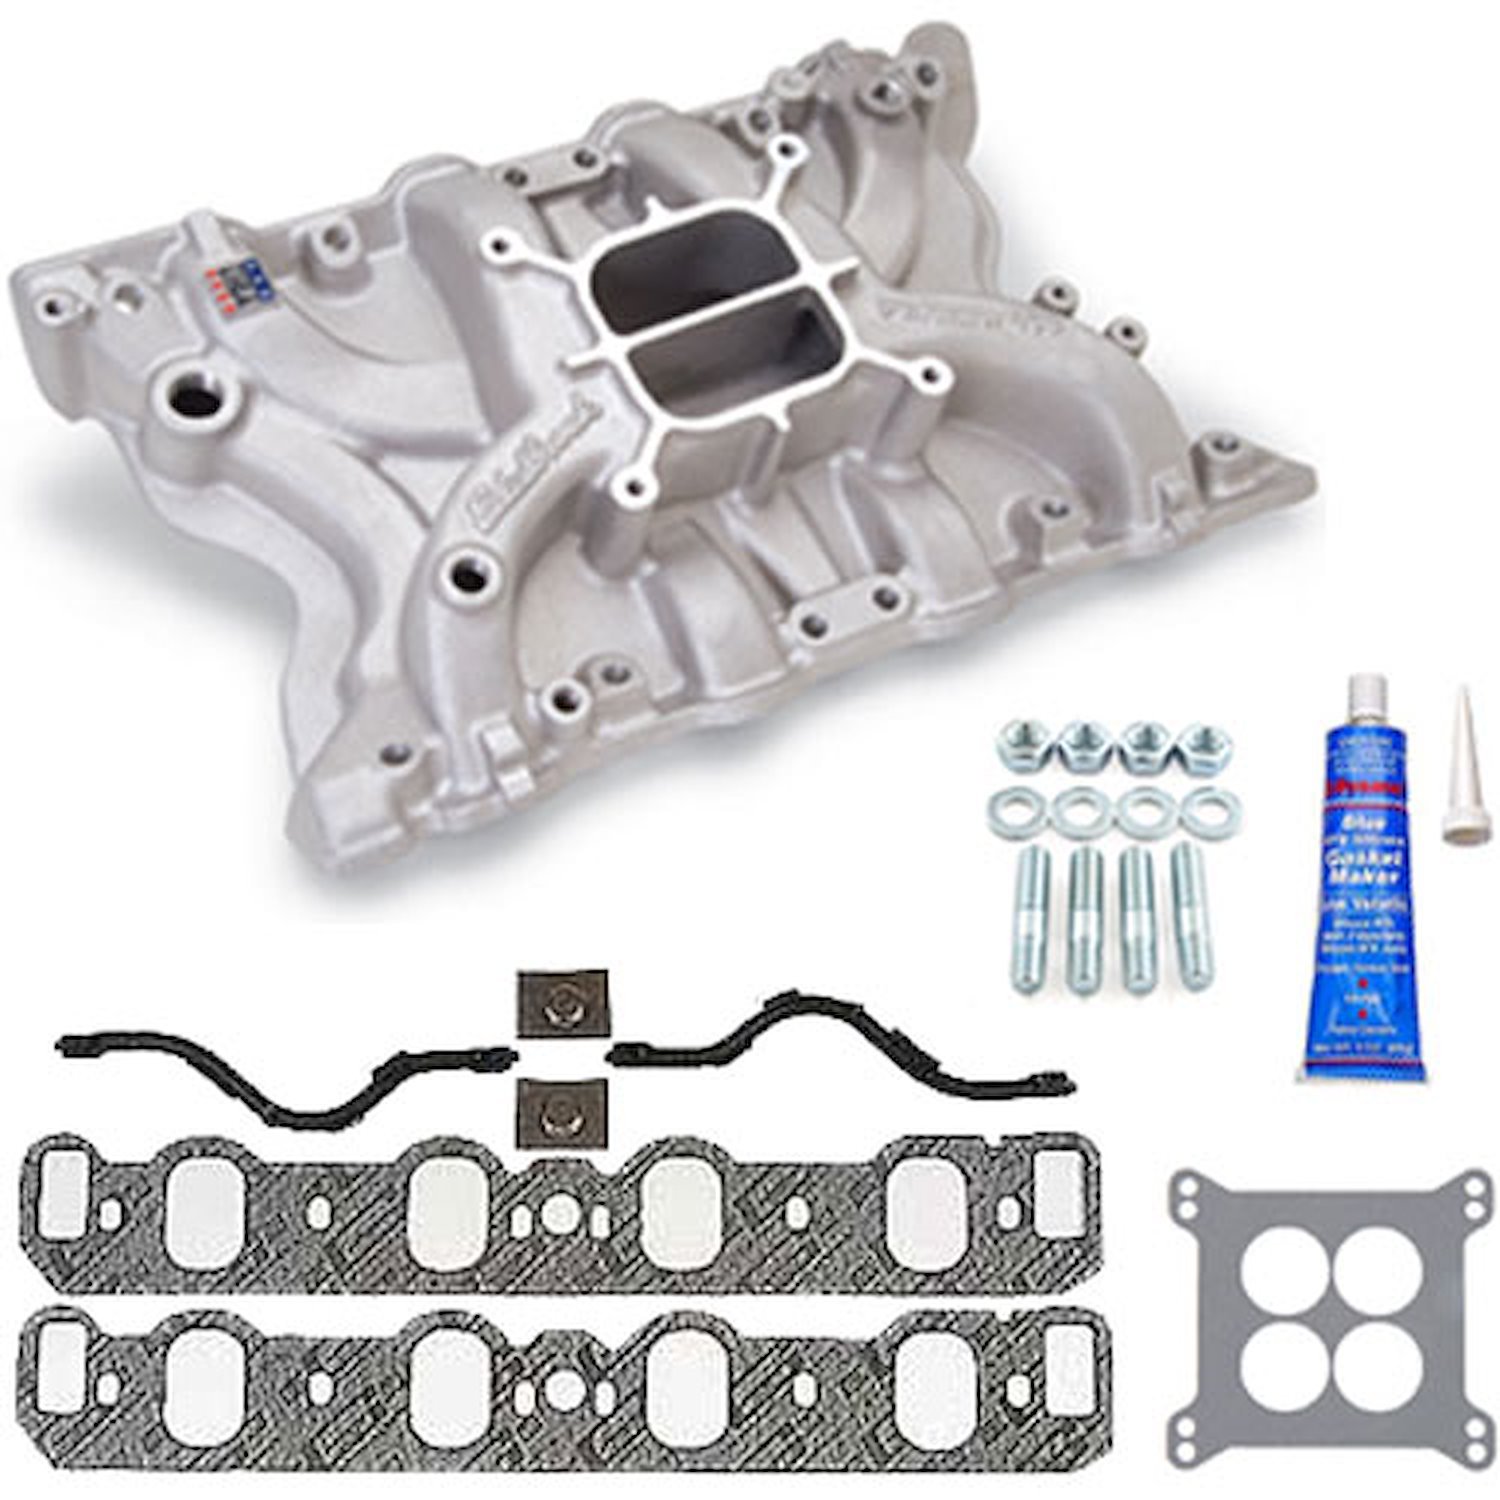 Performer 400 Non-EGR Ford Intake Manifold with Installation Kit